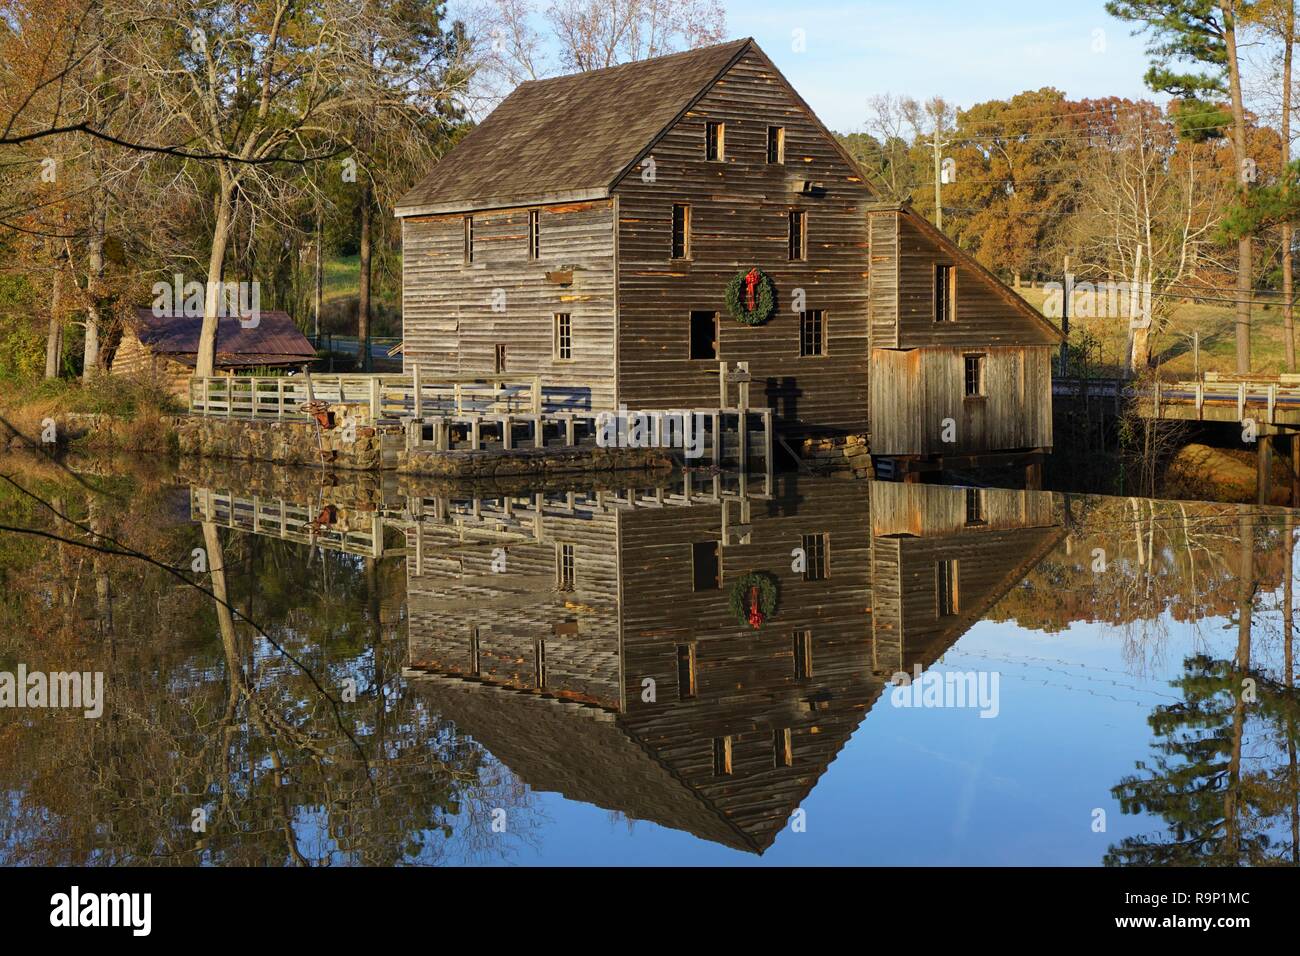 Old mill with holiday wreath reflecting in a pond. Yates Mill in Raleigh, North Carolina Stock Photo